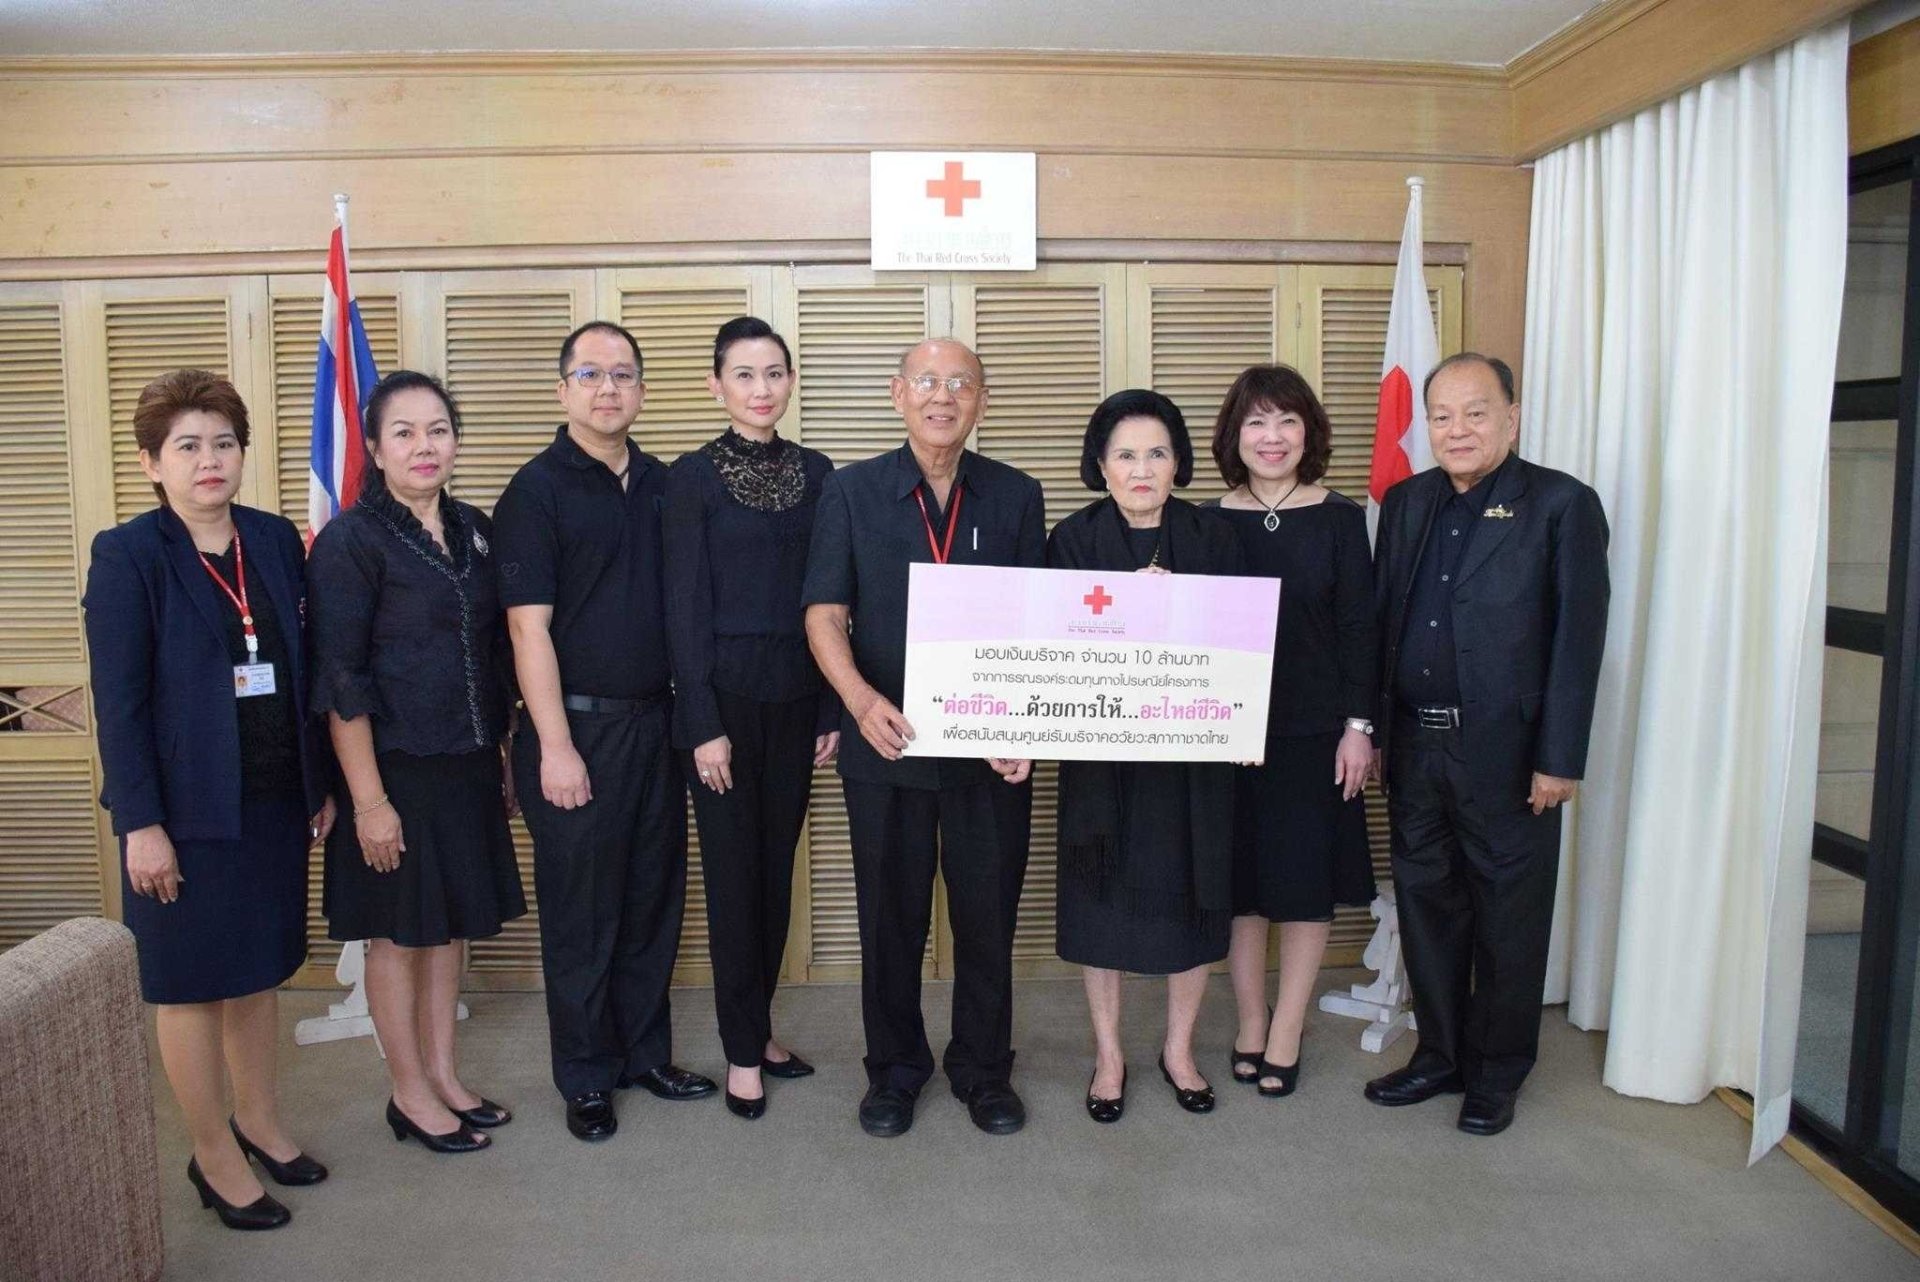  Launched the project "Continuing Life with the Gift of Life," supporting the organ donation center of the Thai Red Cross Society.